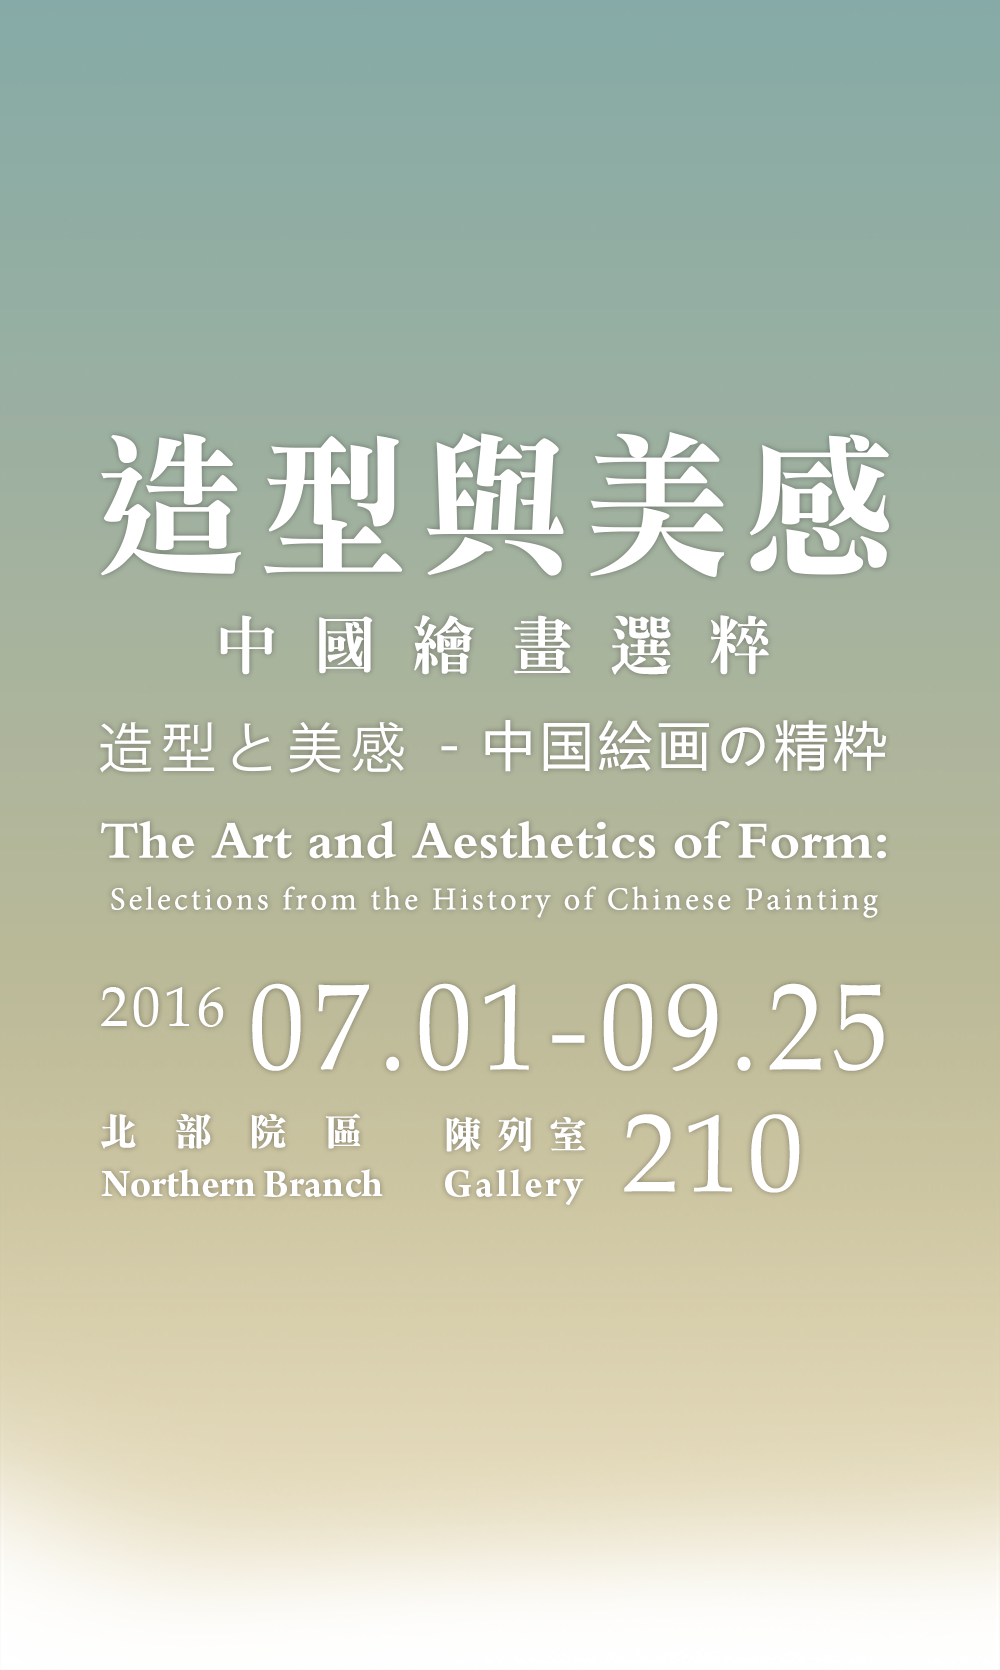 The Art and Aesthetics of Form:Selections from the History of Chinese Painting，Period 2016/7/1 to 2016/9/25，Northern Branch Gallery 210